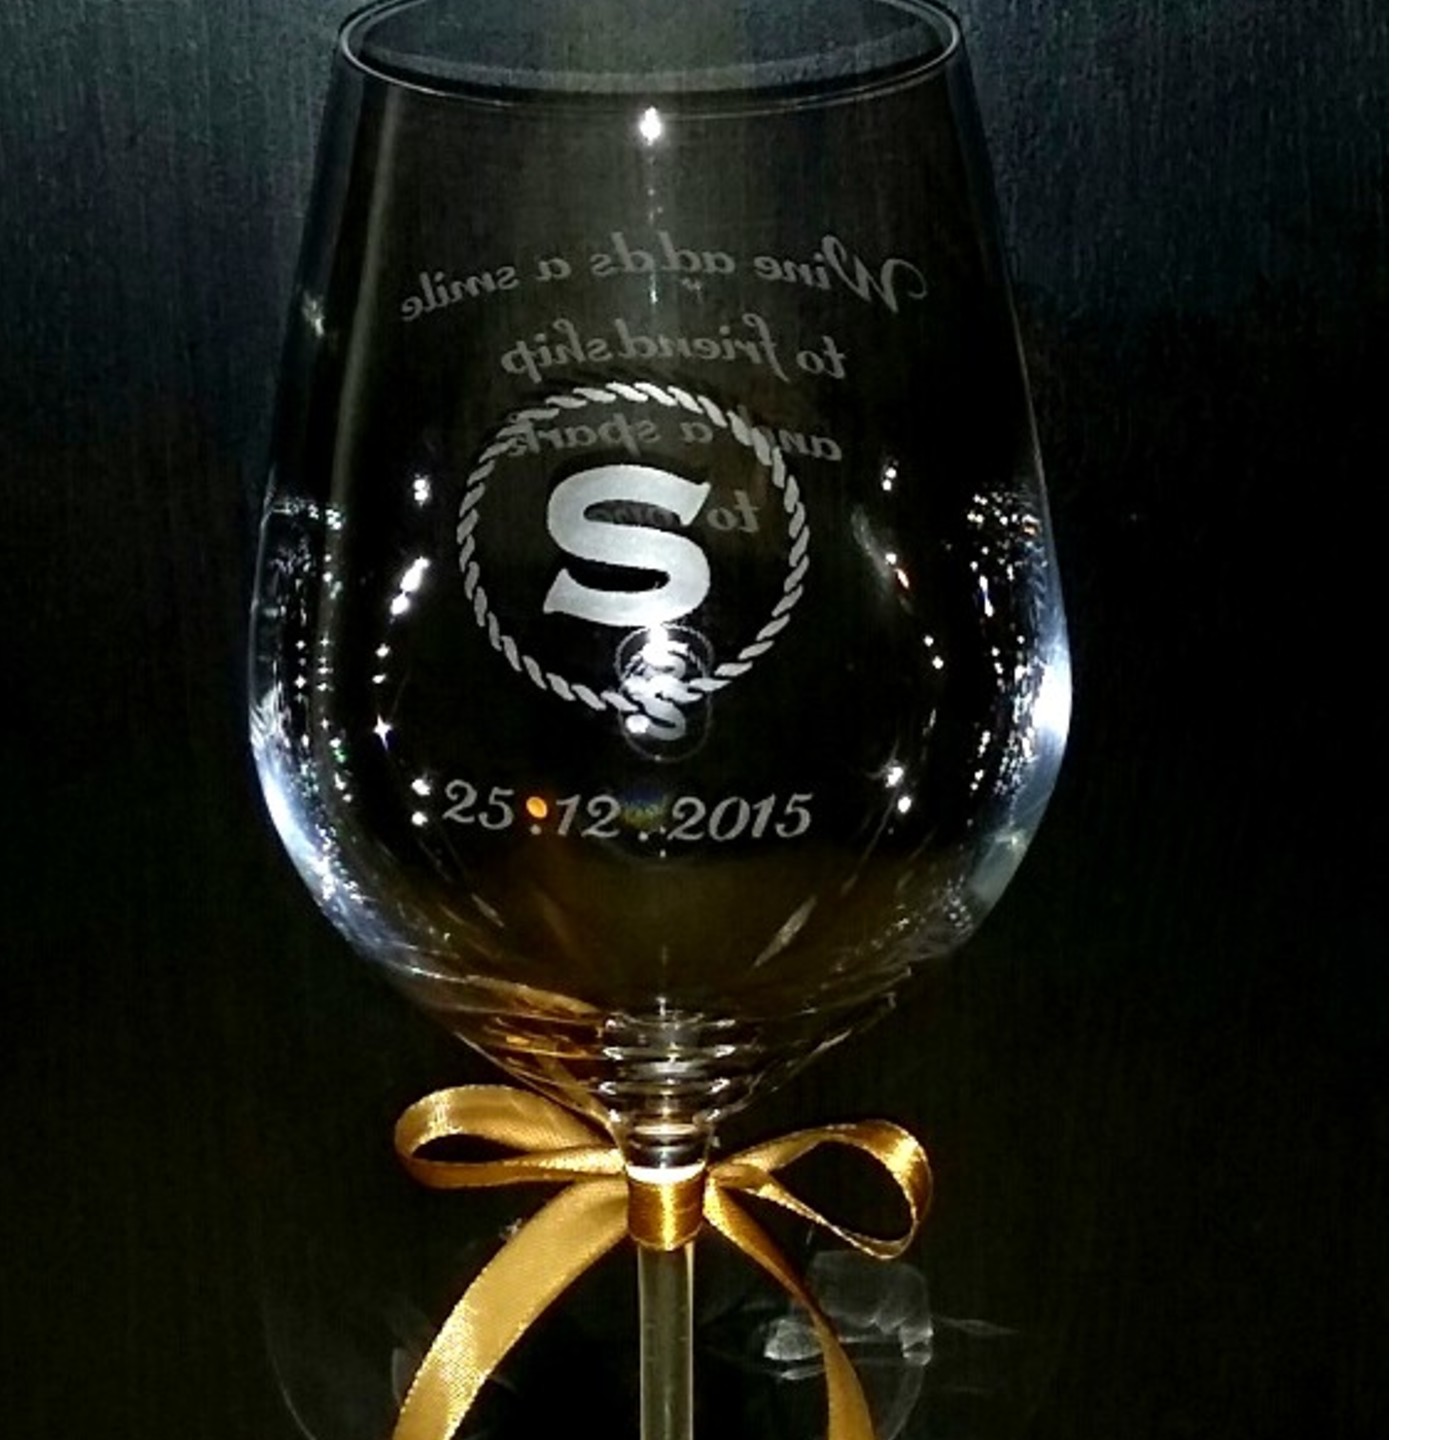 ENGRAVED PERSONALIZED MONOGRAM ON A CRYSTAL WINE GLASS SMGEG-004WC